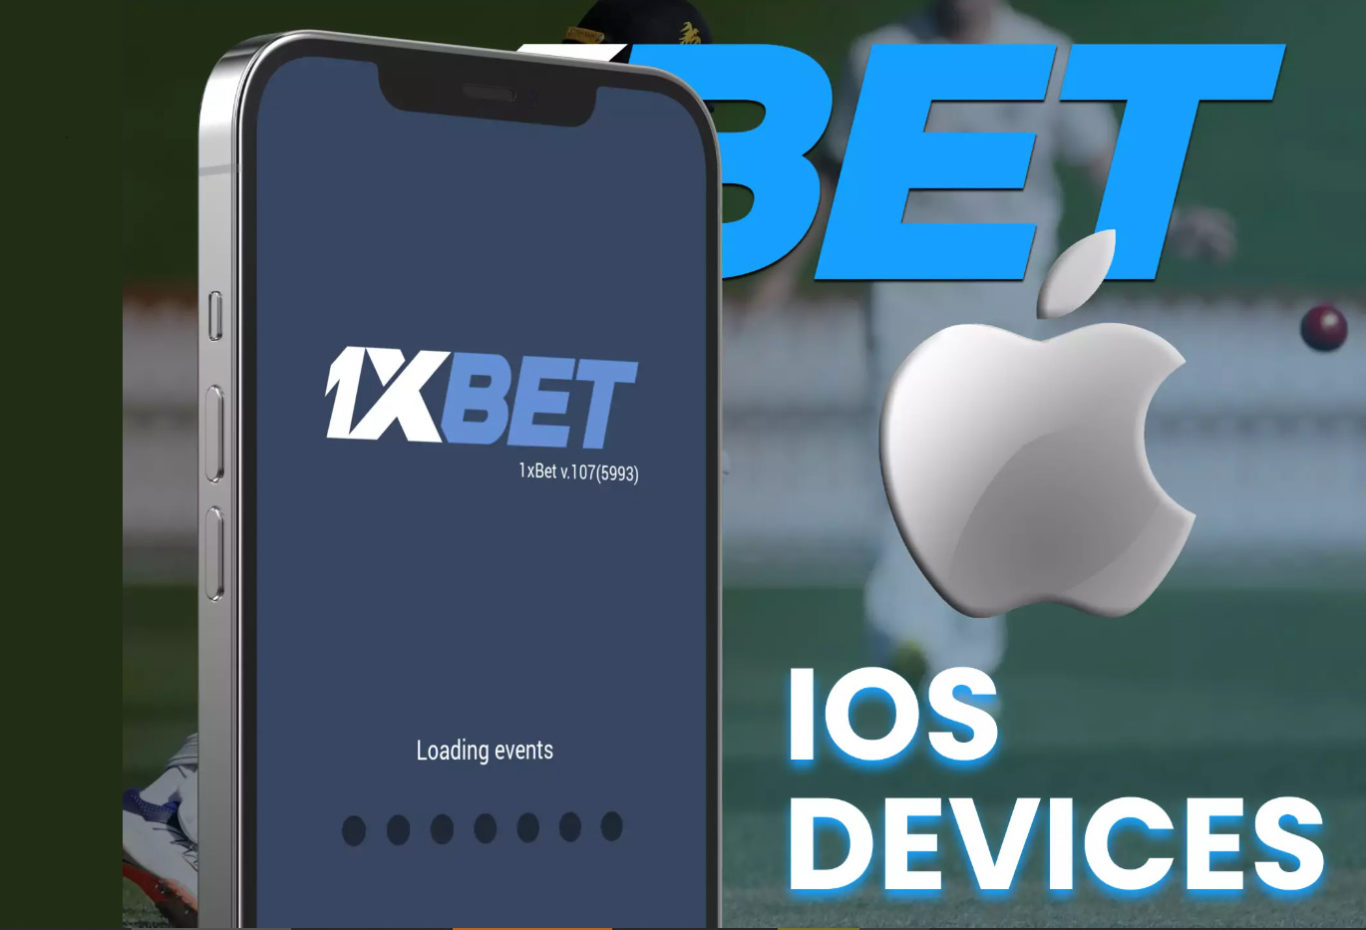 1xBet app download for iOS gadgets